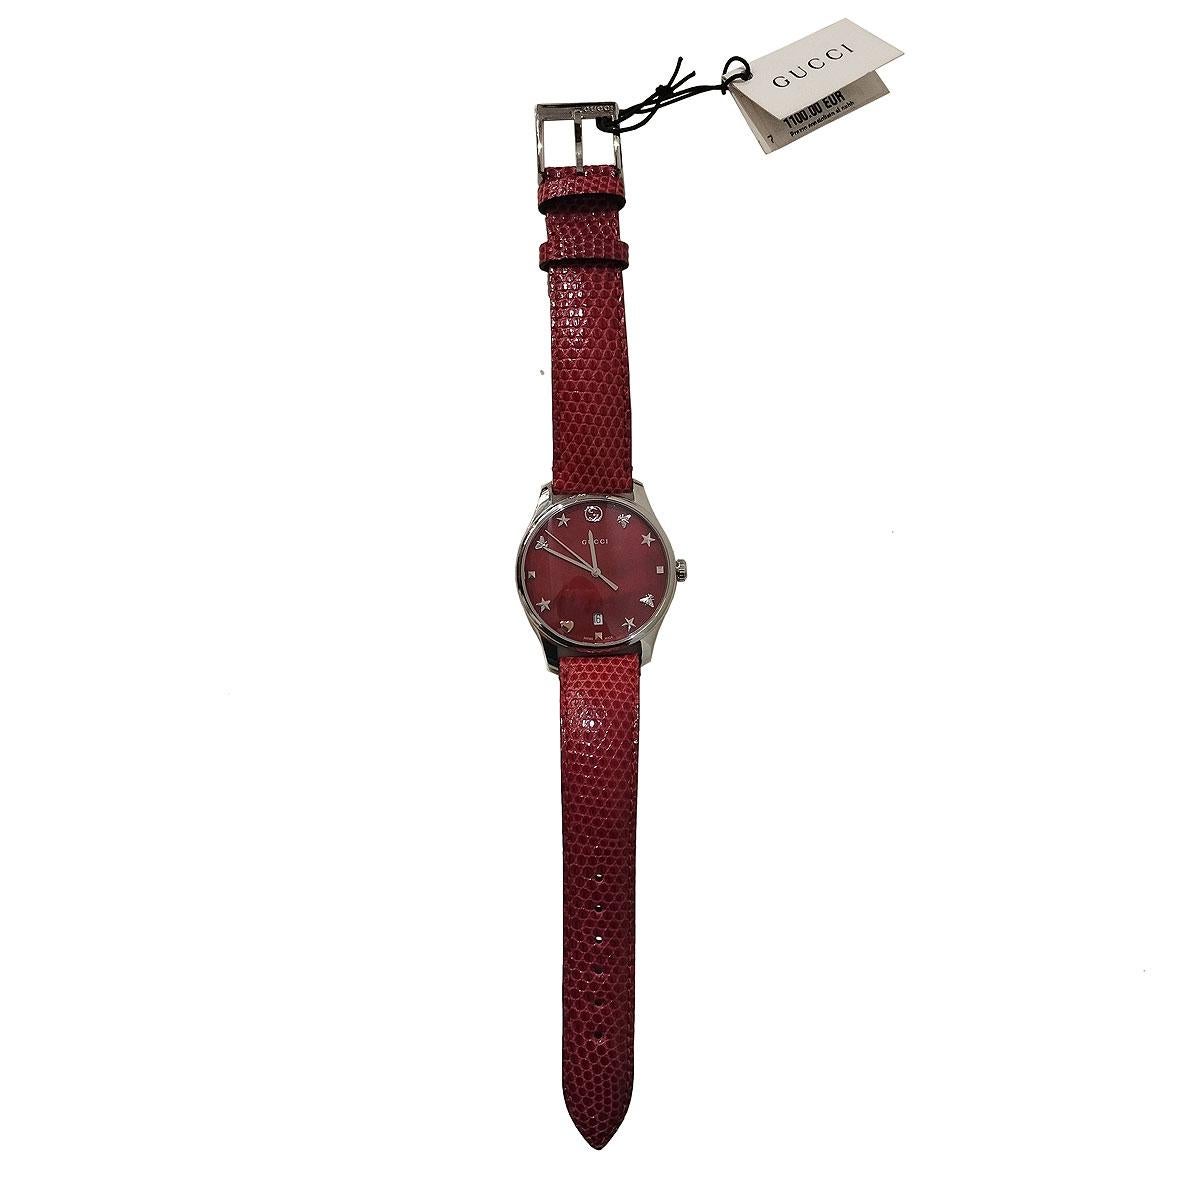 Beautiful and brand new Gucci watch
Timeless Watch
YA1264041
Steel 
Cherry red dial
Glass
Quartz mechanism (brand new battery)
Water resistant
Case 36 mm
Red lizard printed leather bracelet 
With box
Original price € 1100
Worldwide express shipping